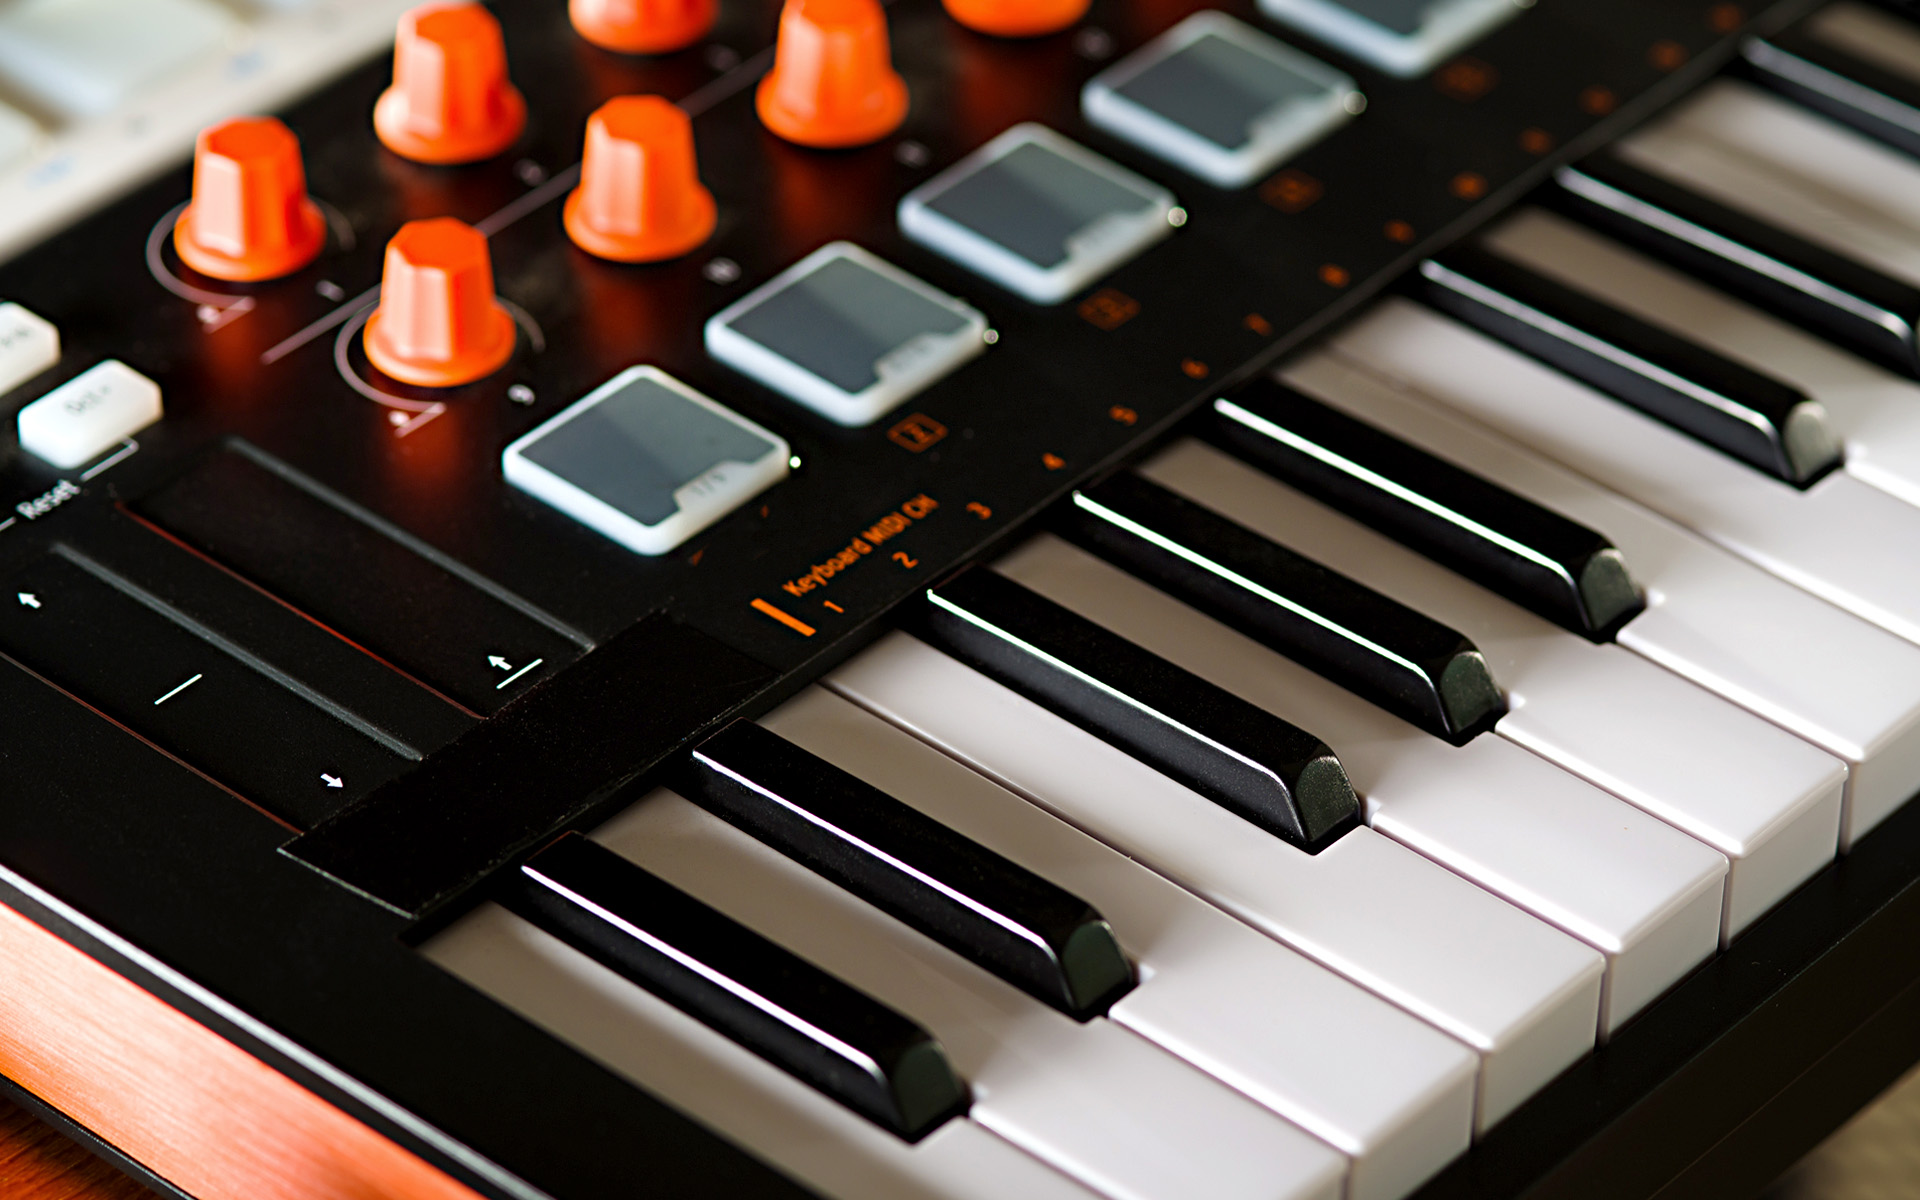 A MIDI controller could be a keyboard or something different.